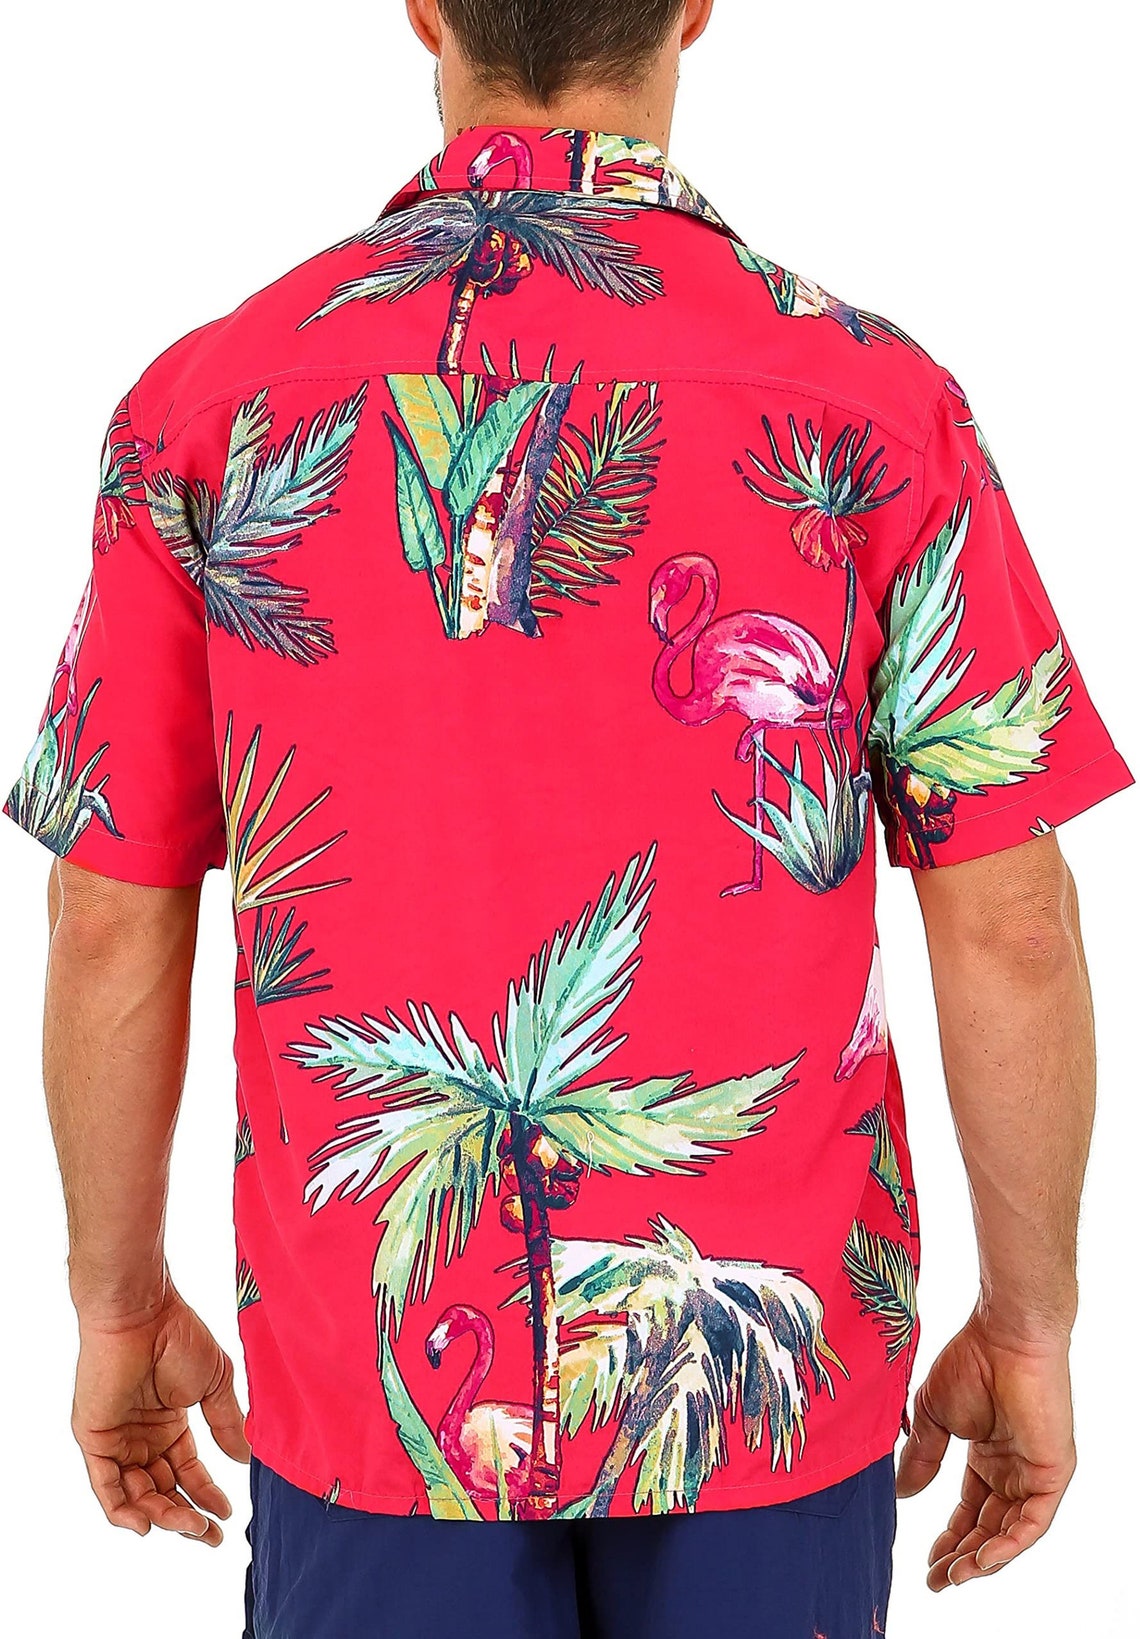 Men's Red Button Down Hawaiian Shirt with Flamingo and | Etsy